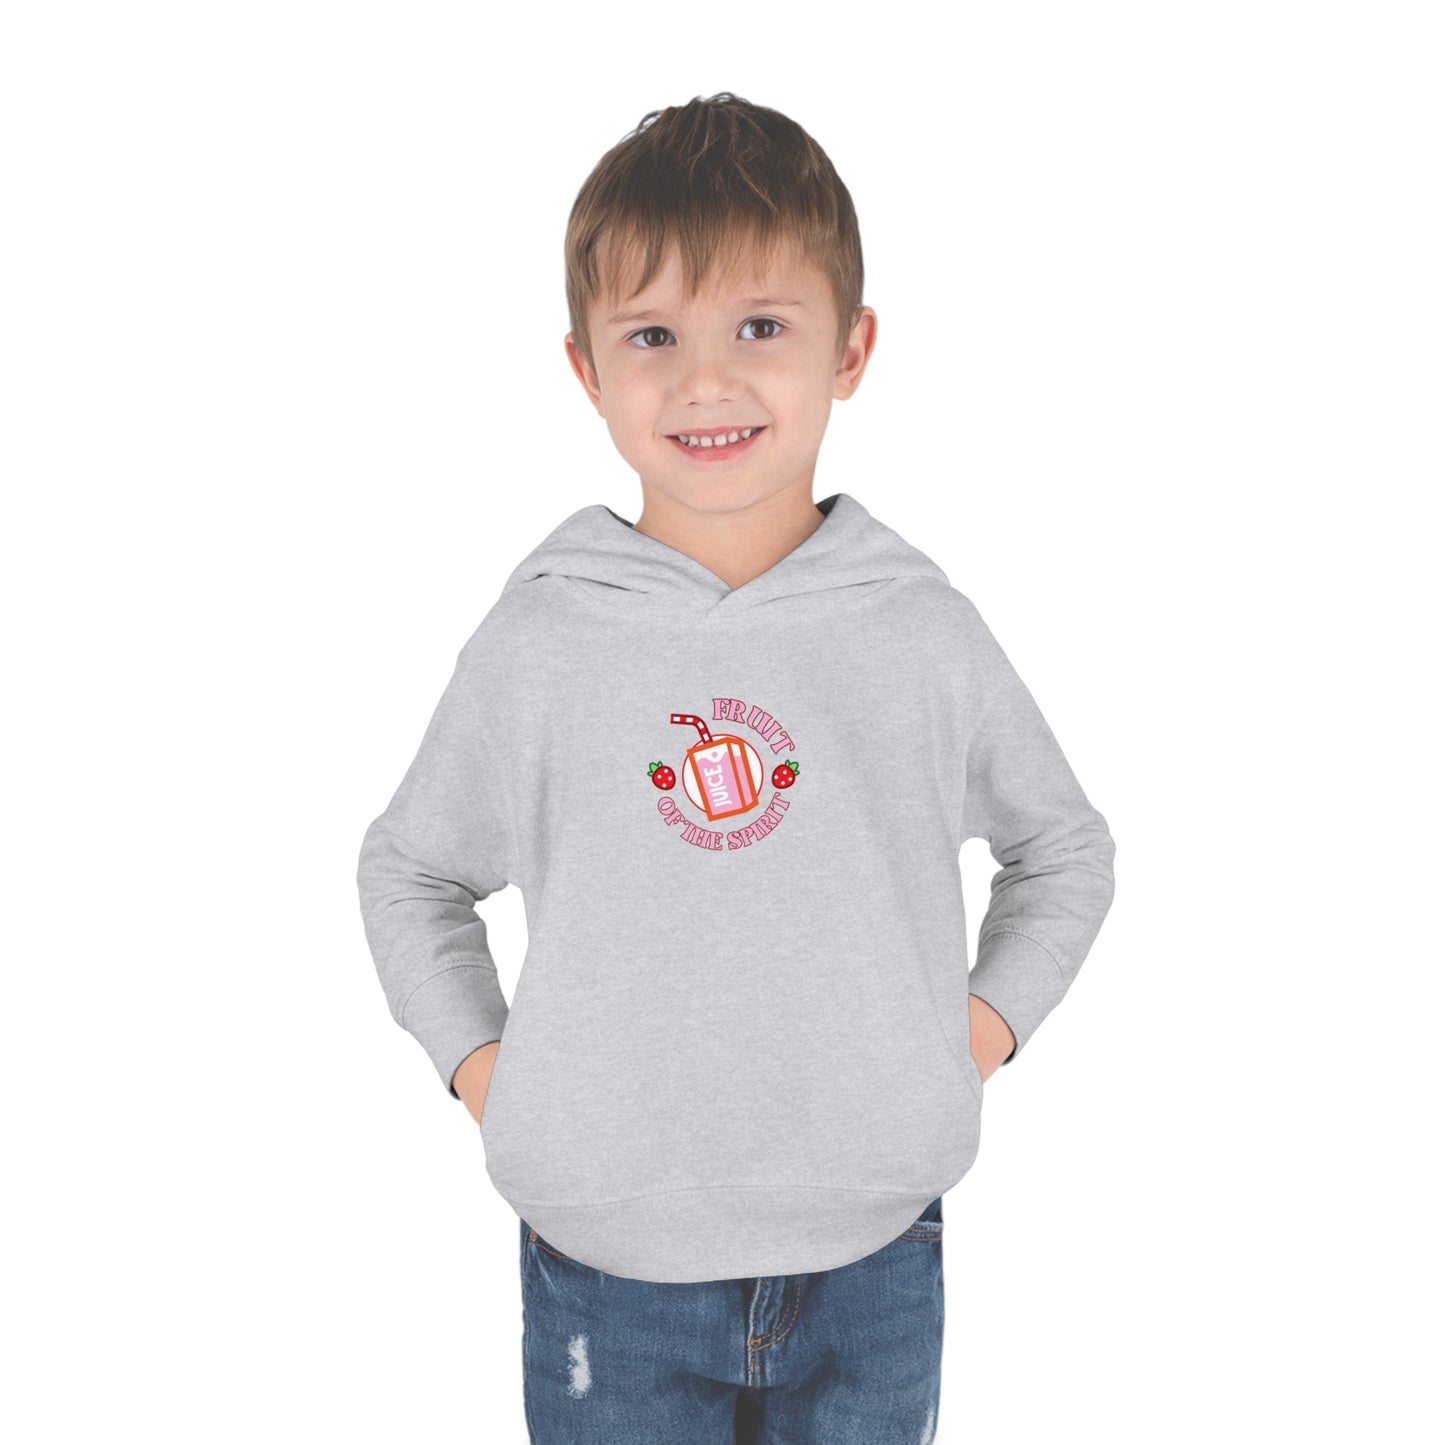 Fruit of The Spirit Pullover Fleece Hoodie, Christian Pullover for Kids, Jesus Hoodie, Toddler & Youth Faith Apparel